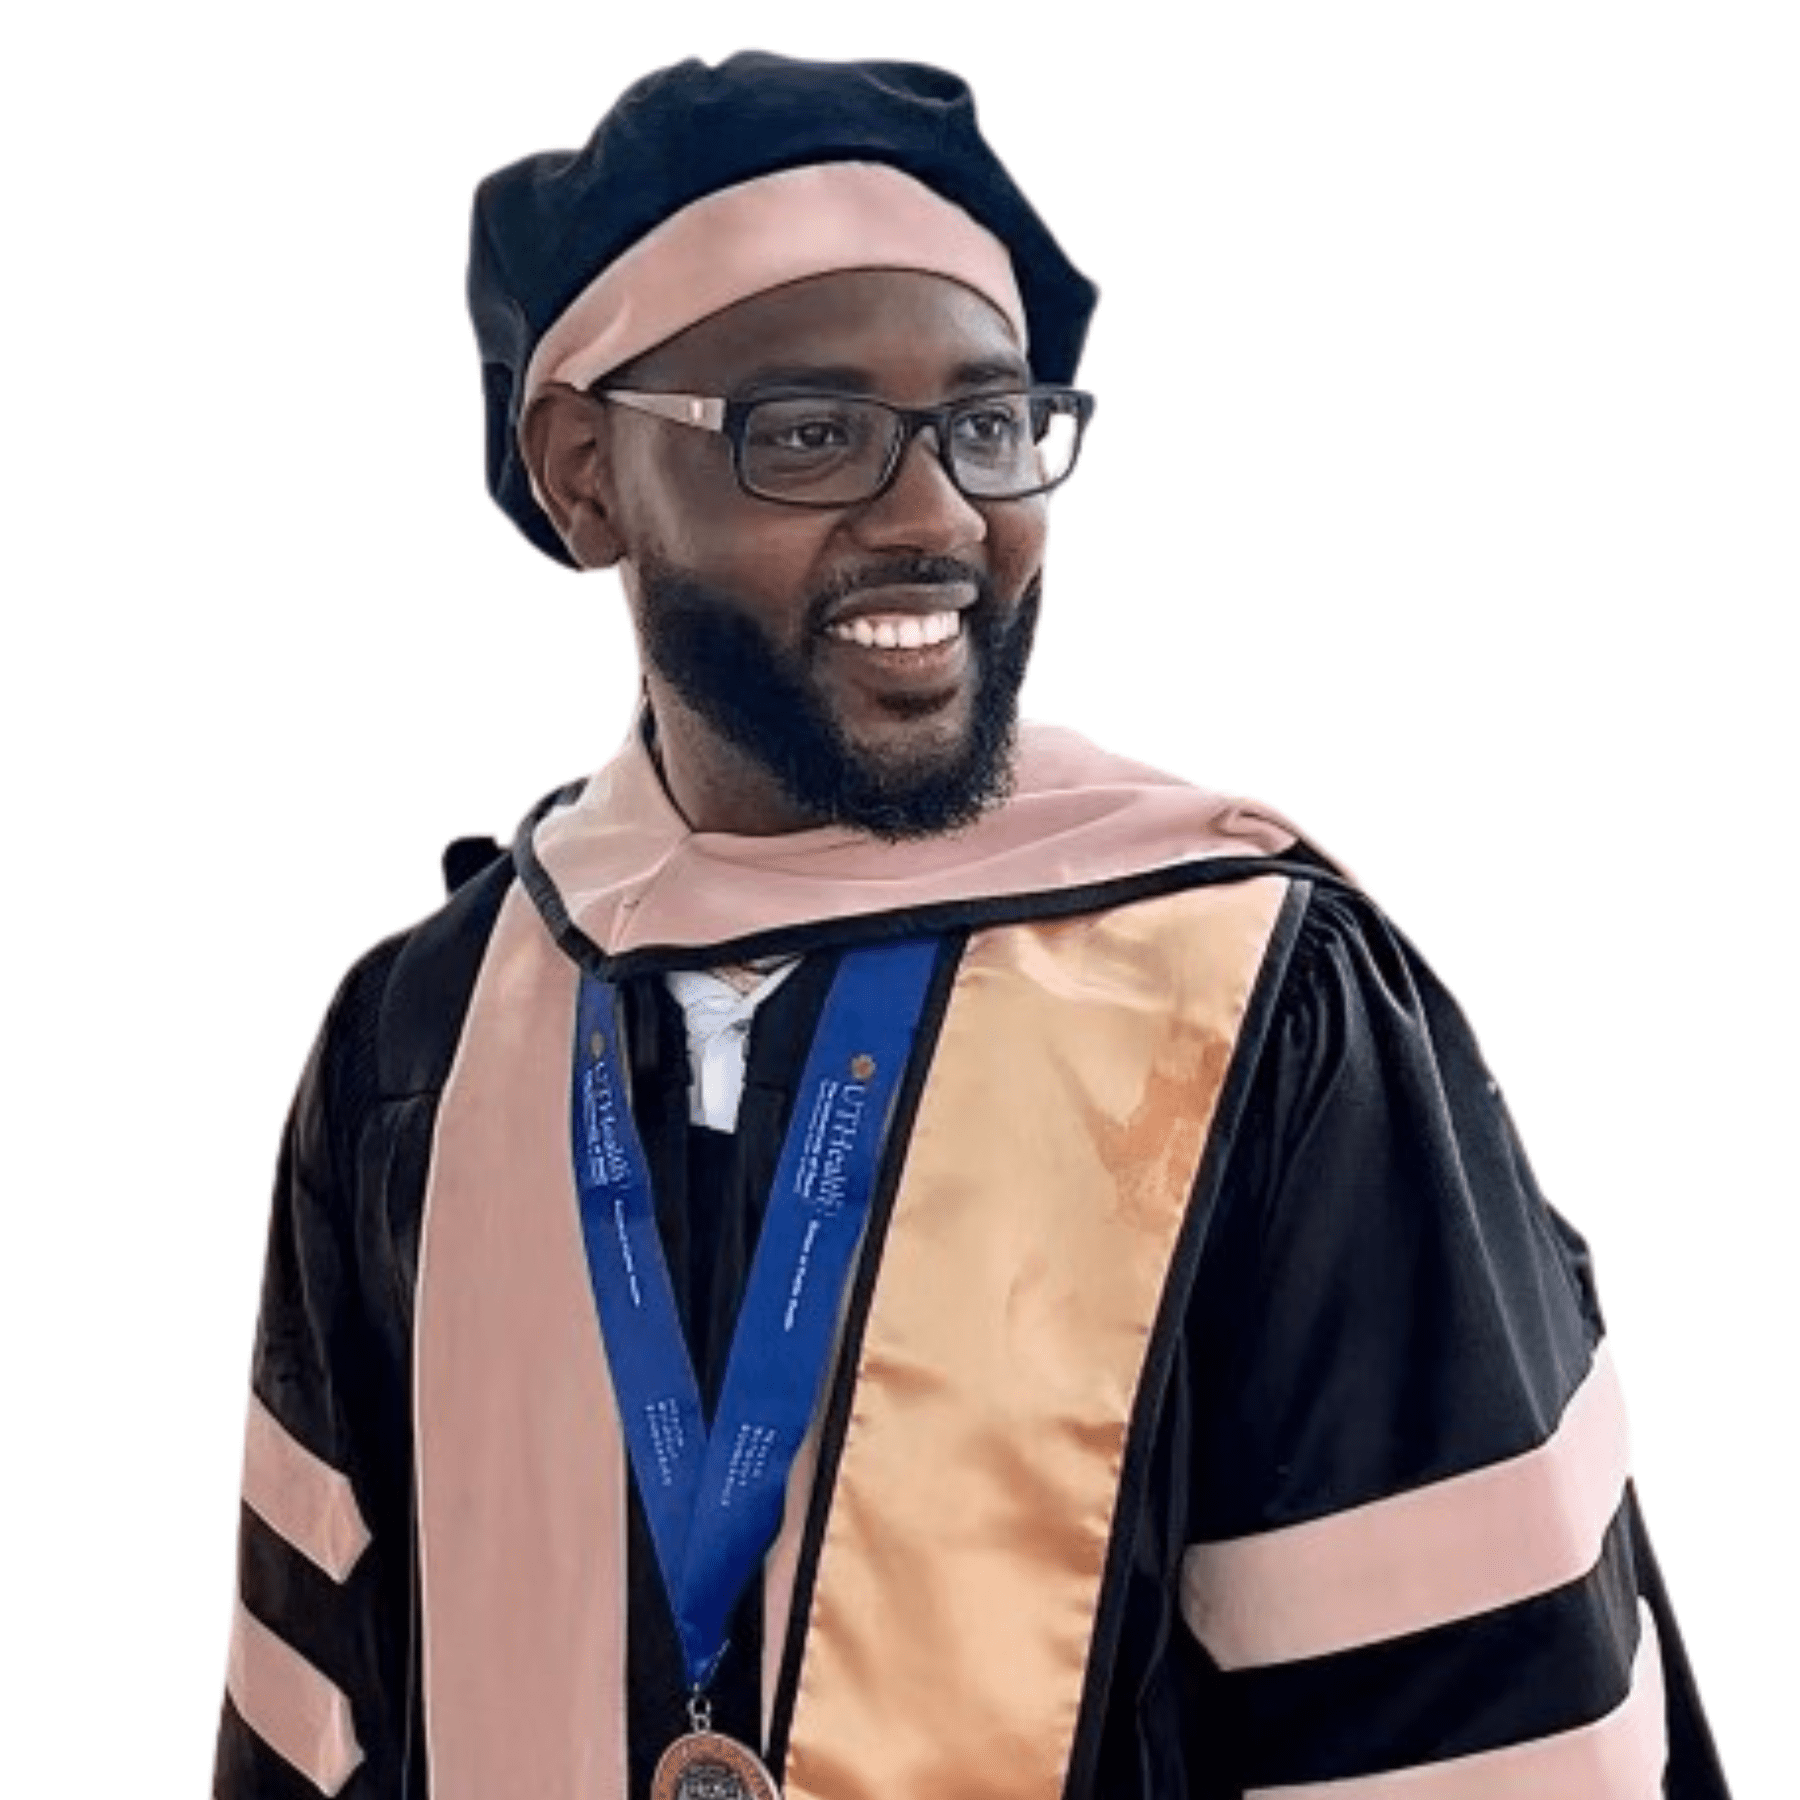 Dr. Anderson, Founder of Black Men in Public Health, in PhD robe. The robe is pink and black with a blue award around his neck.